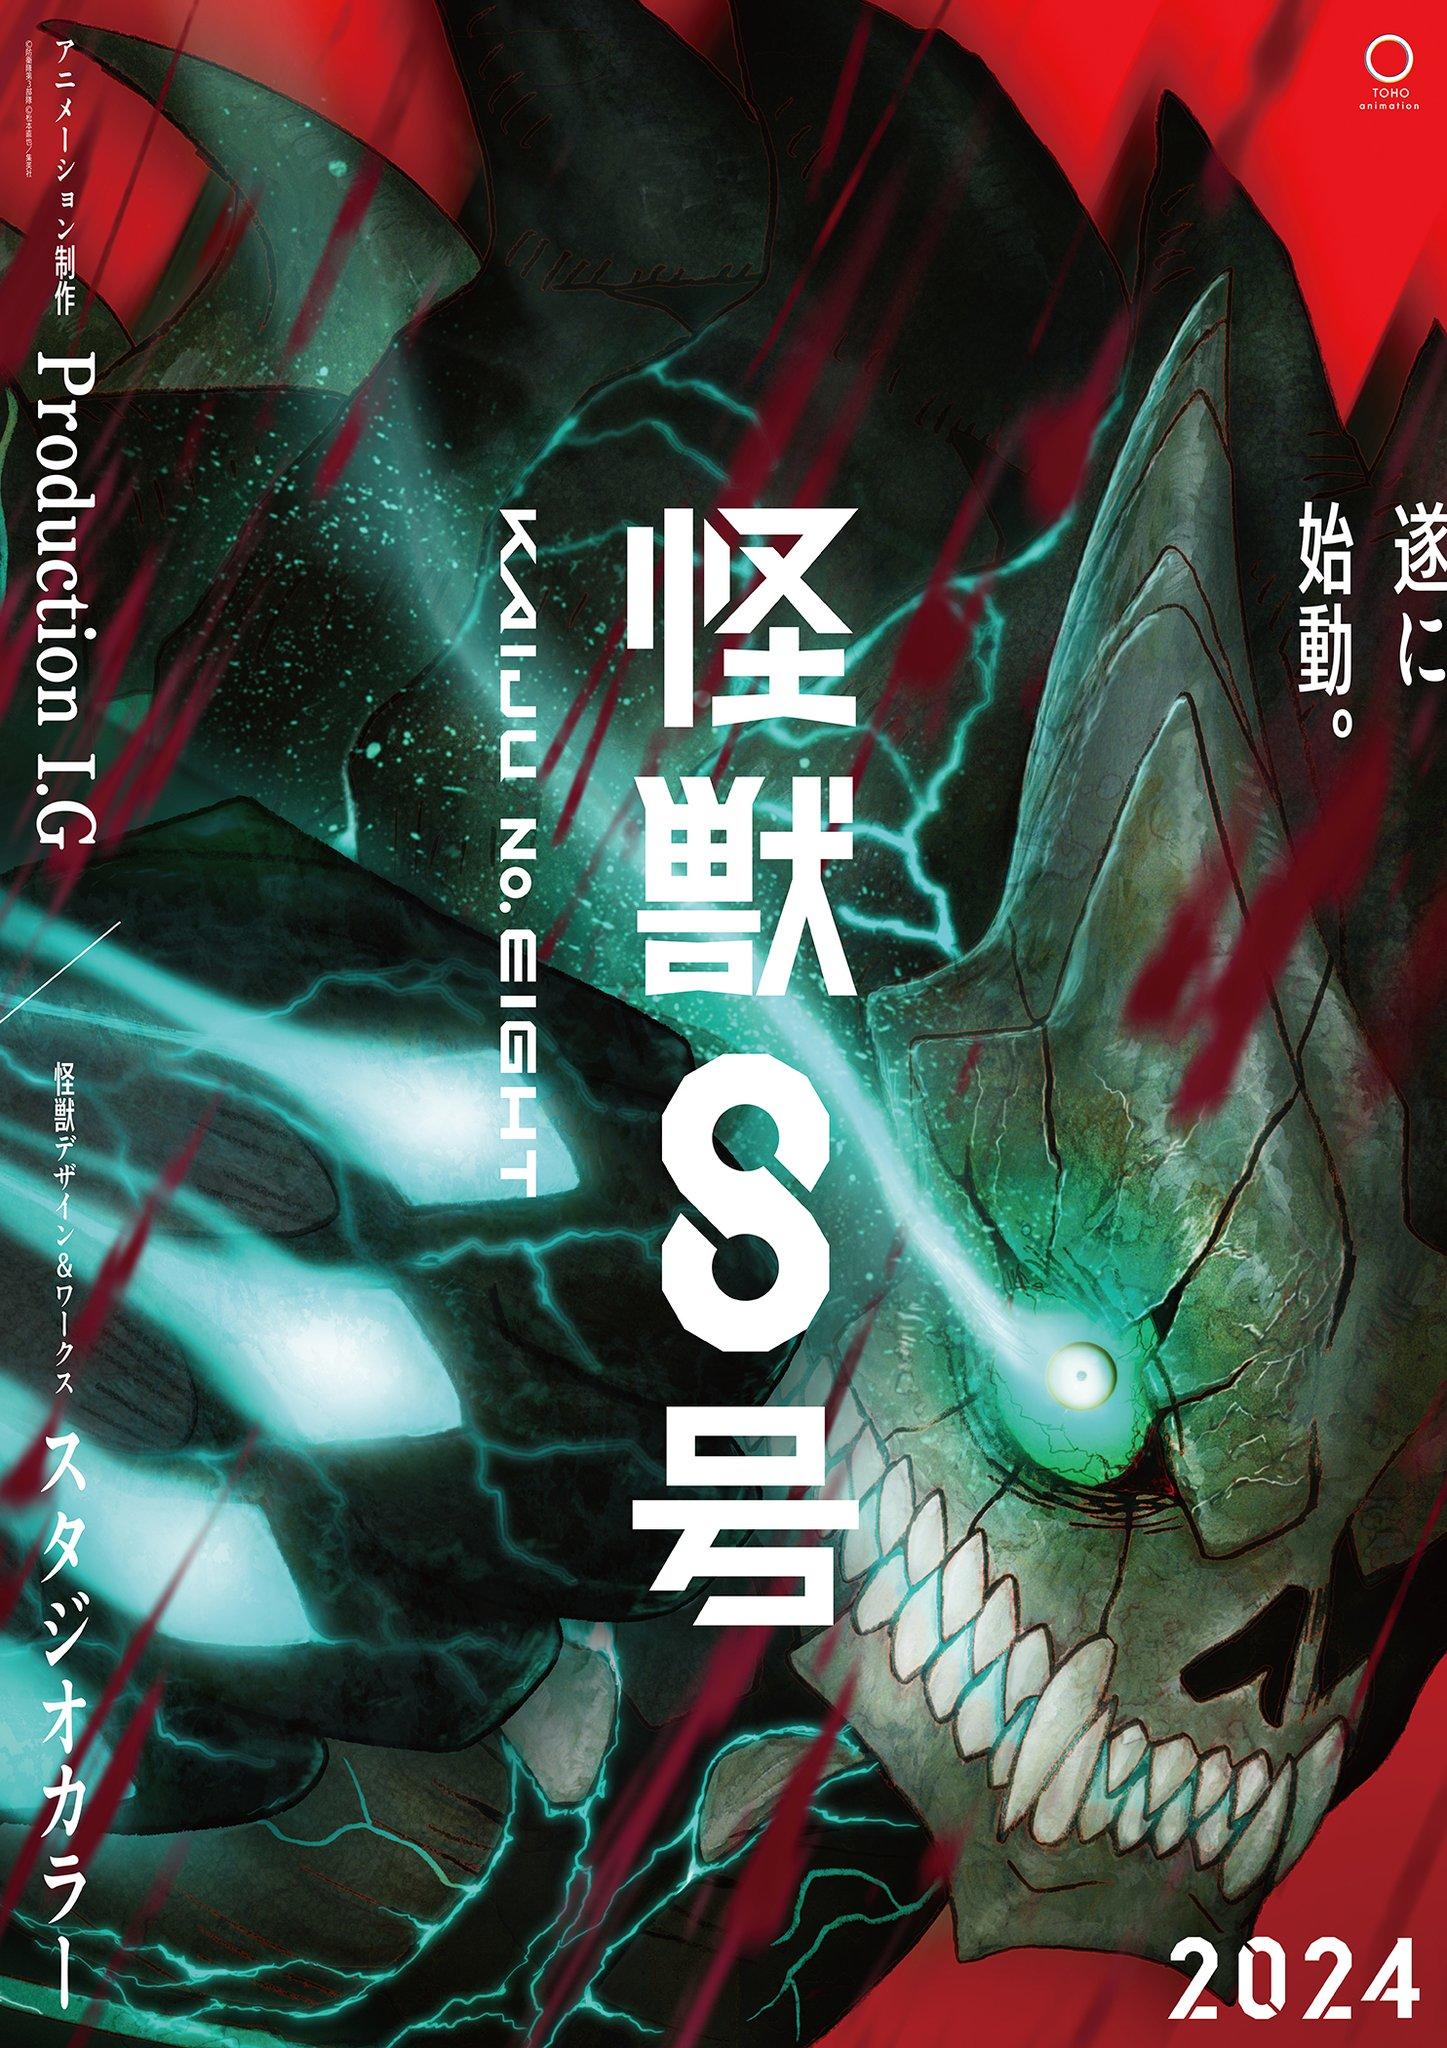 Kaiju No 8 anime adaptation was confirmed to premiere soon  Try Hard  Guides